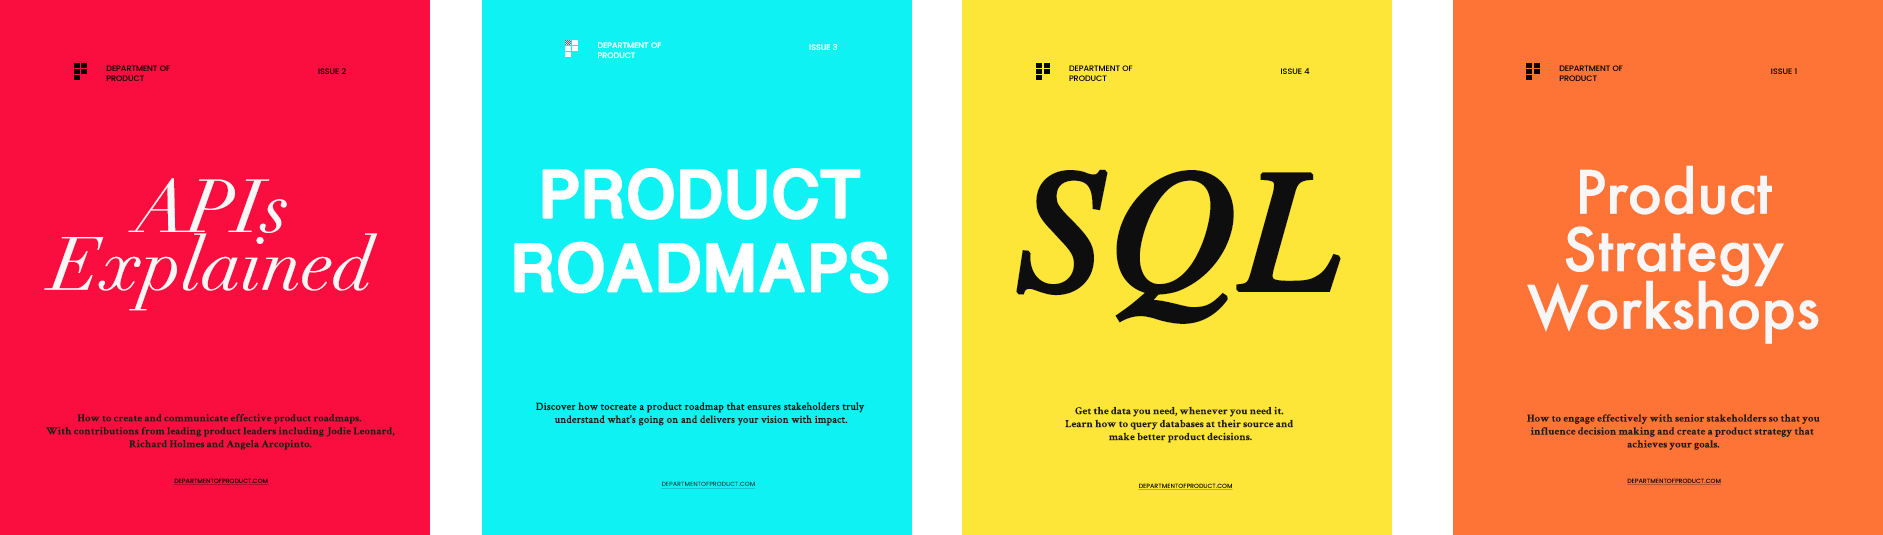 The Department of Product guide books